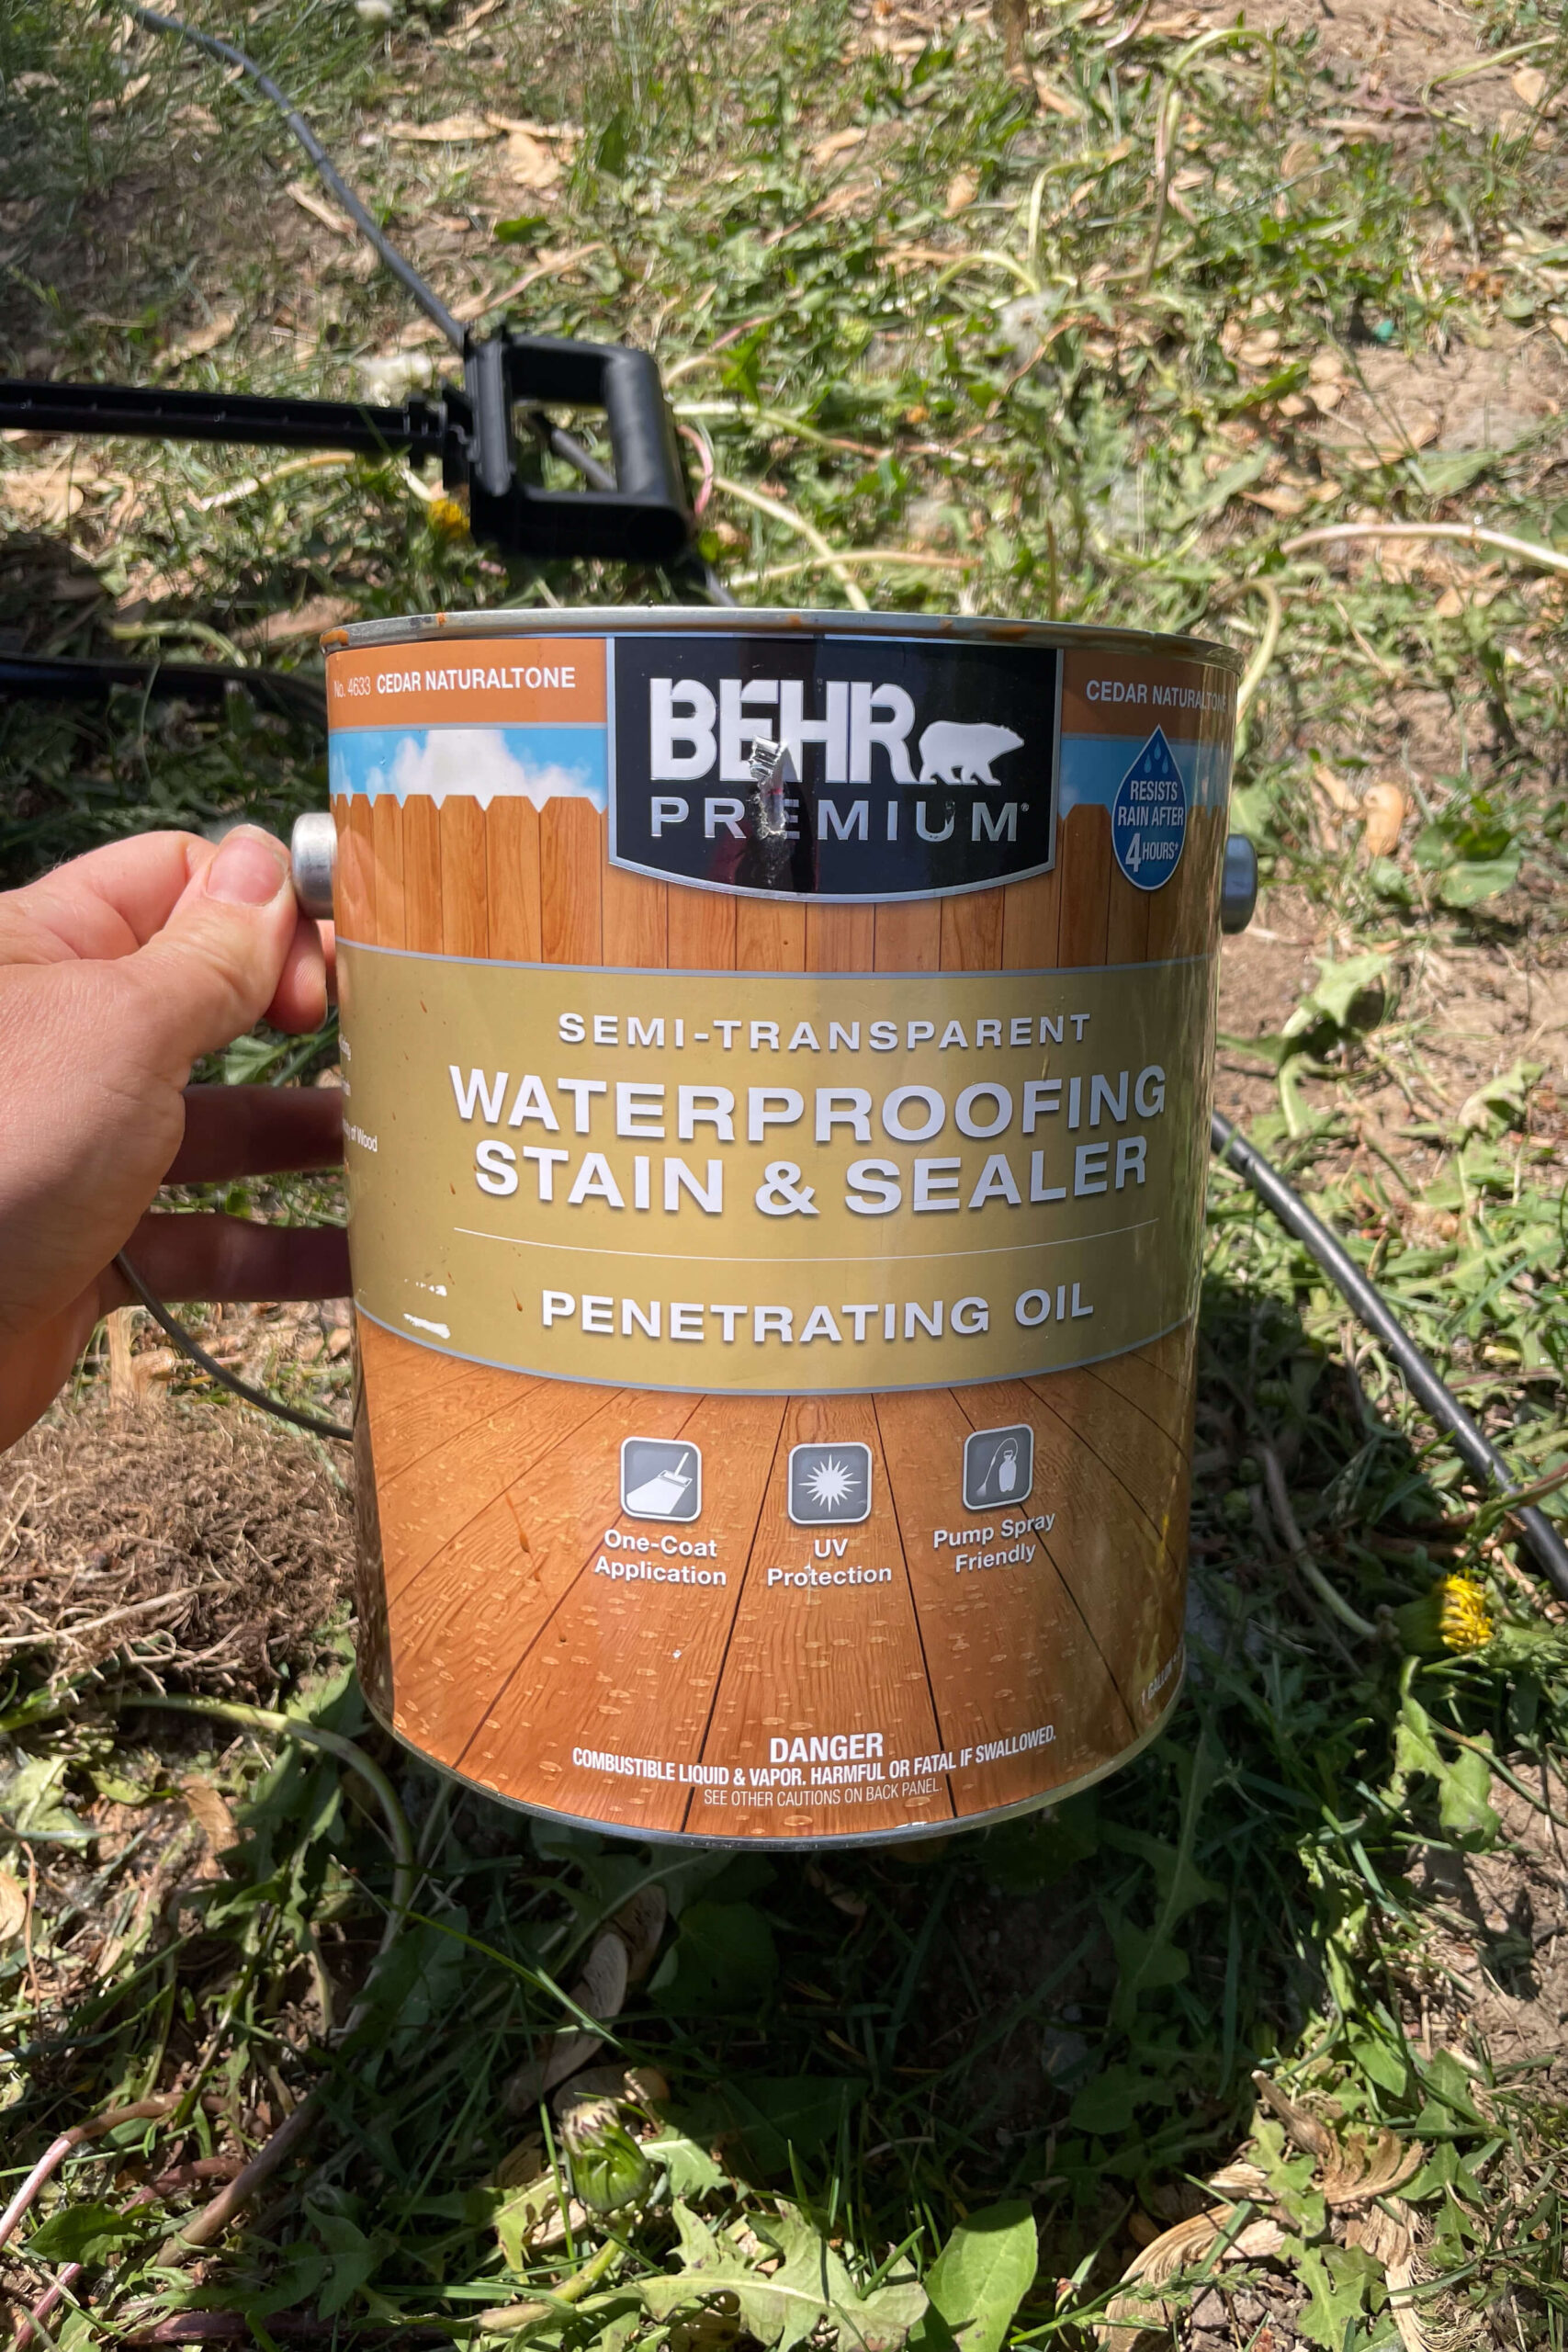 Using Behr Waterproofing Stain and Sealer on a wood fence.